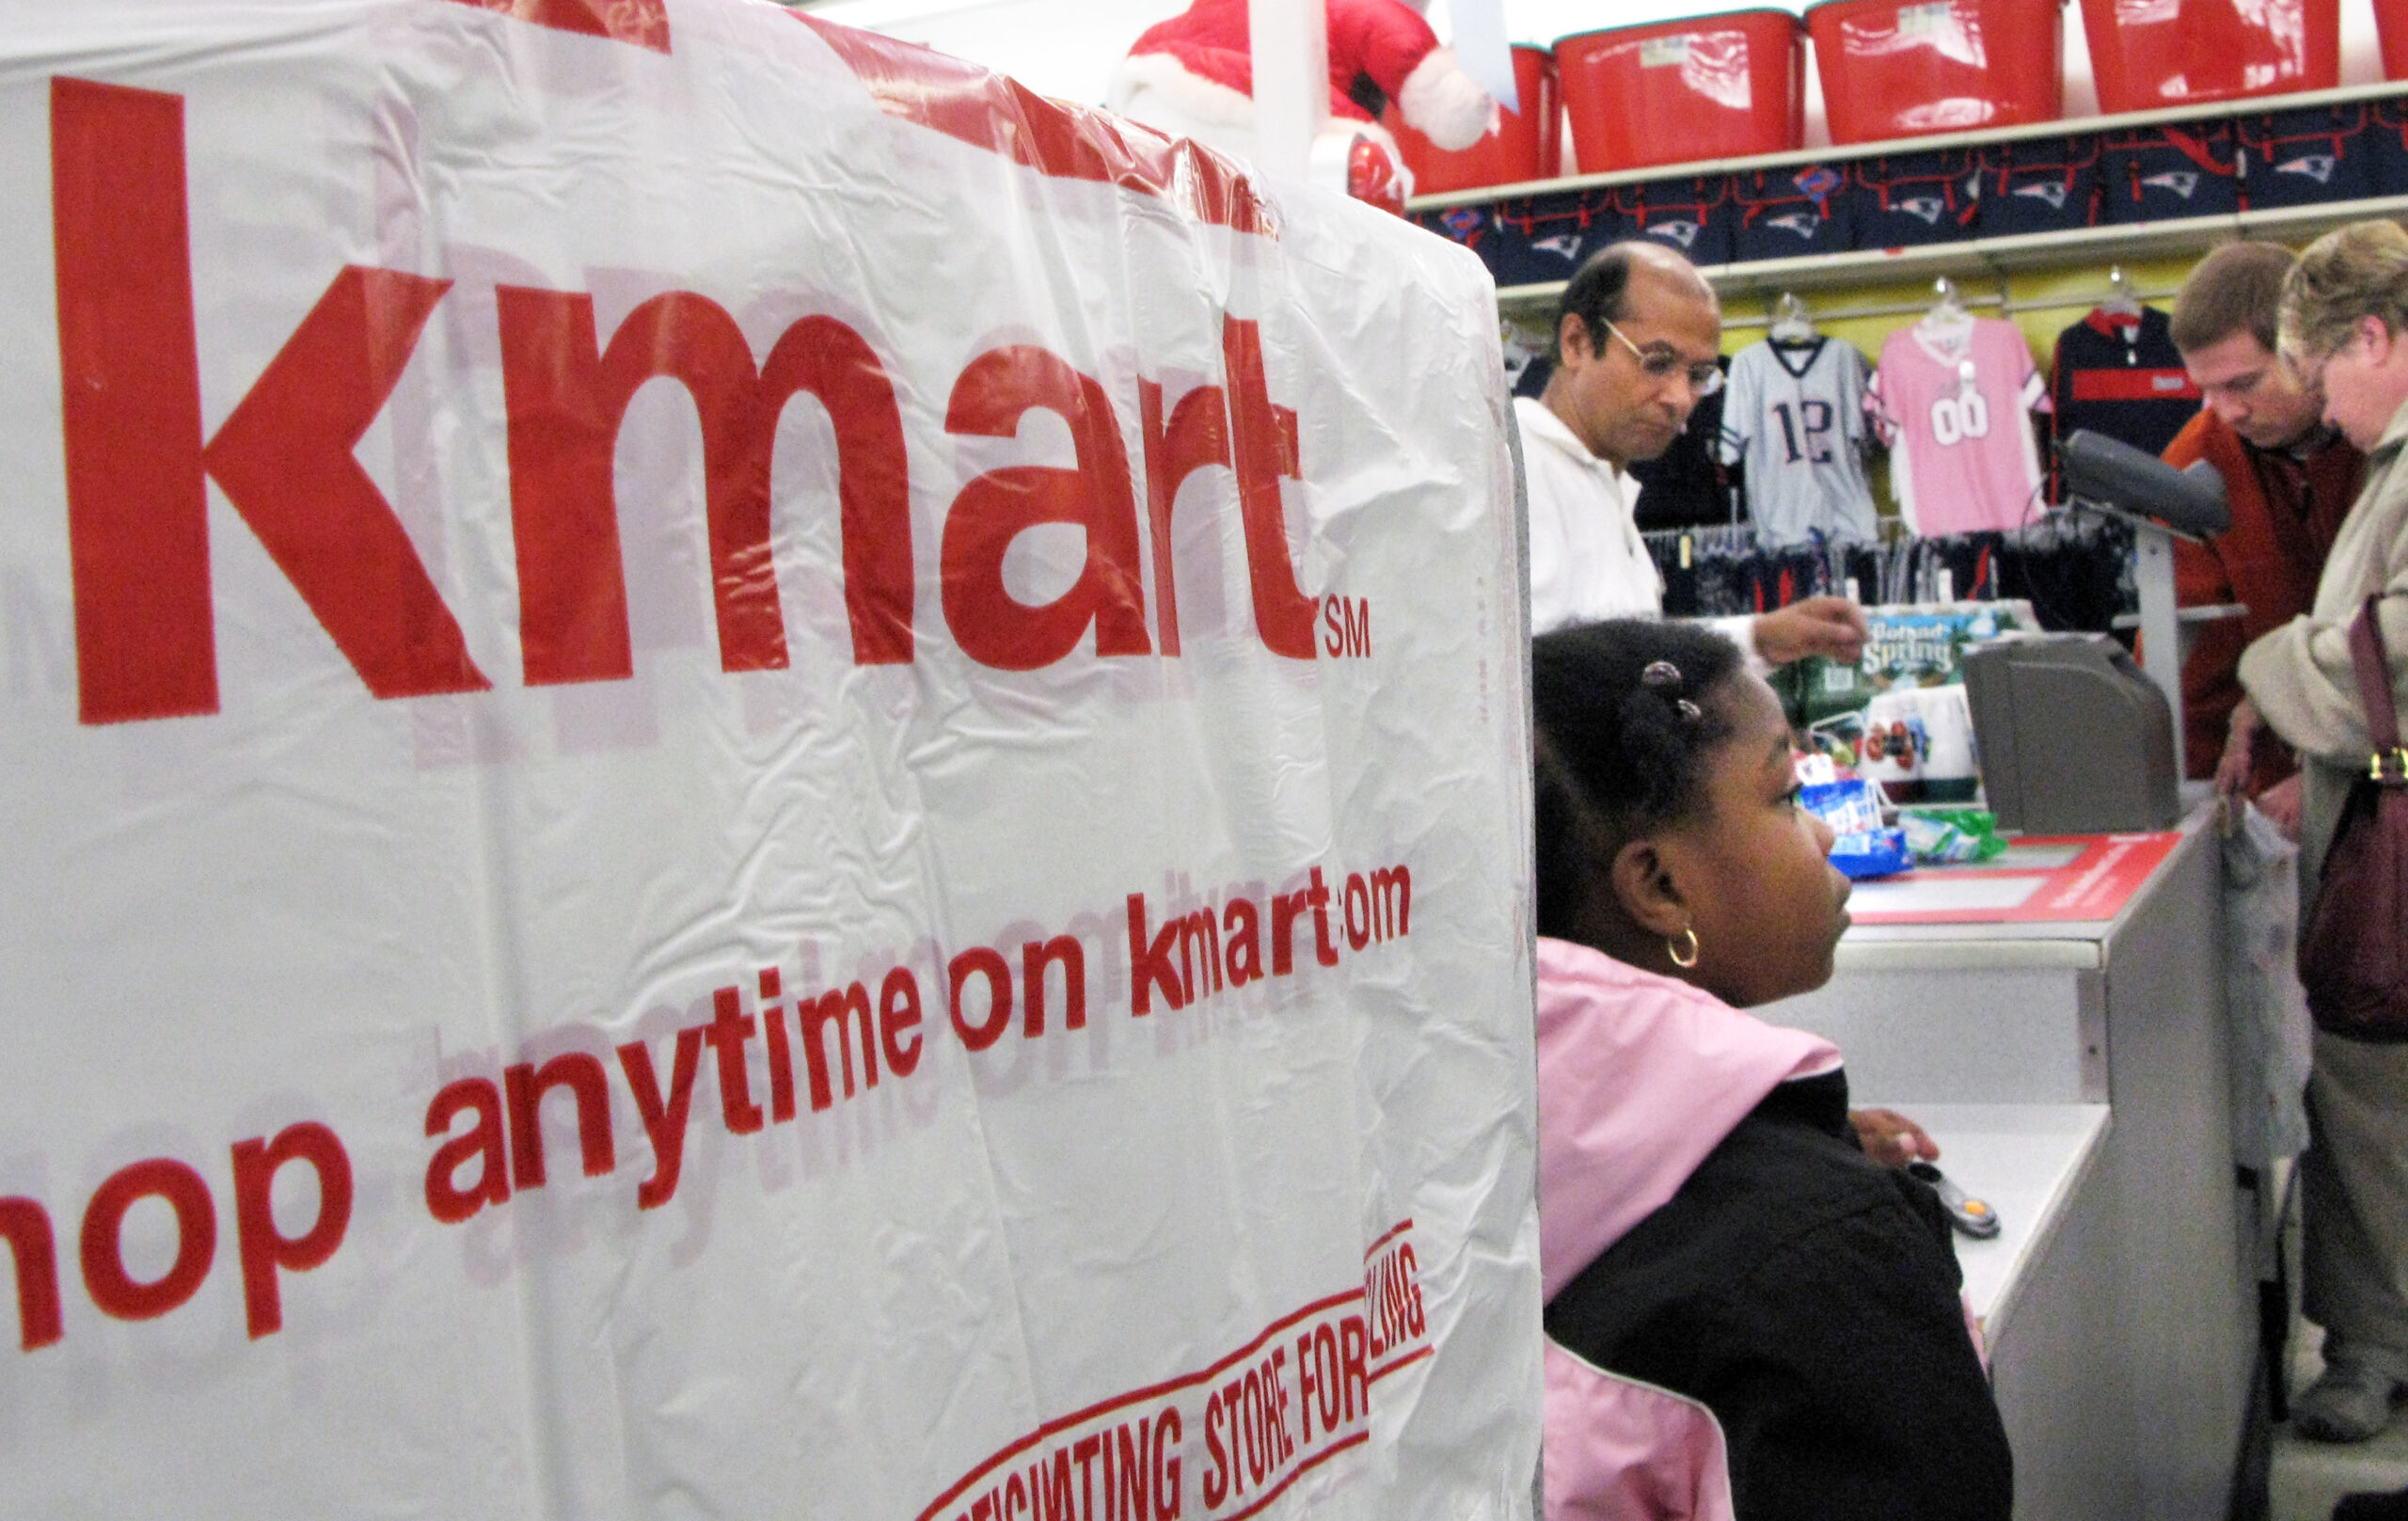 People shopping at Kmart